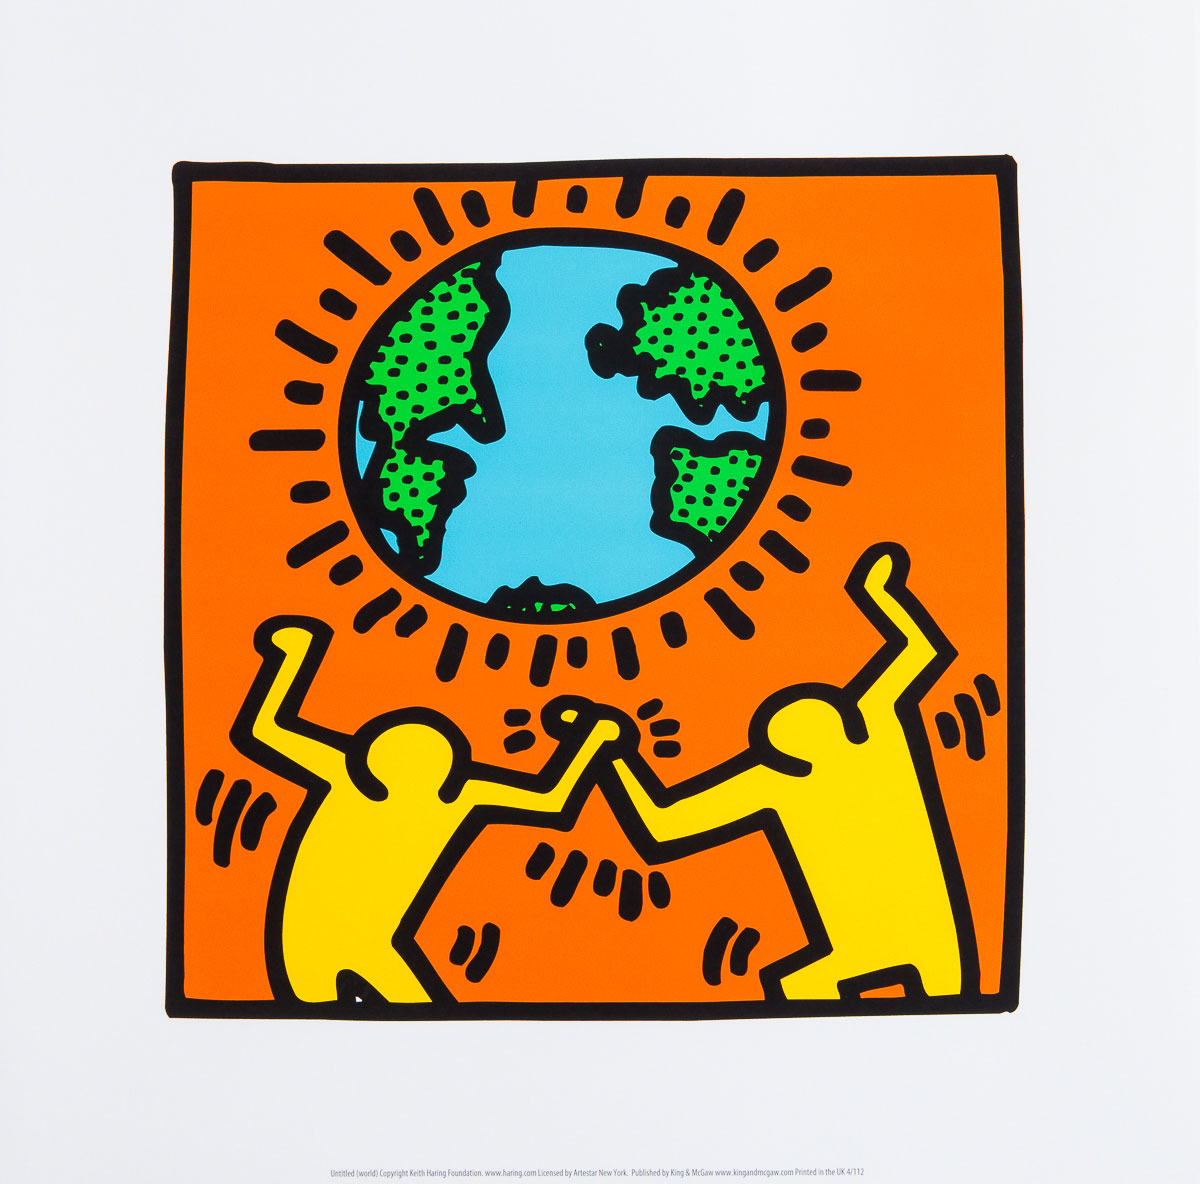 Stampa Keith Haring : Earth, world - Stampa